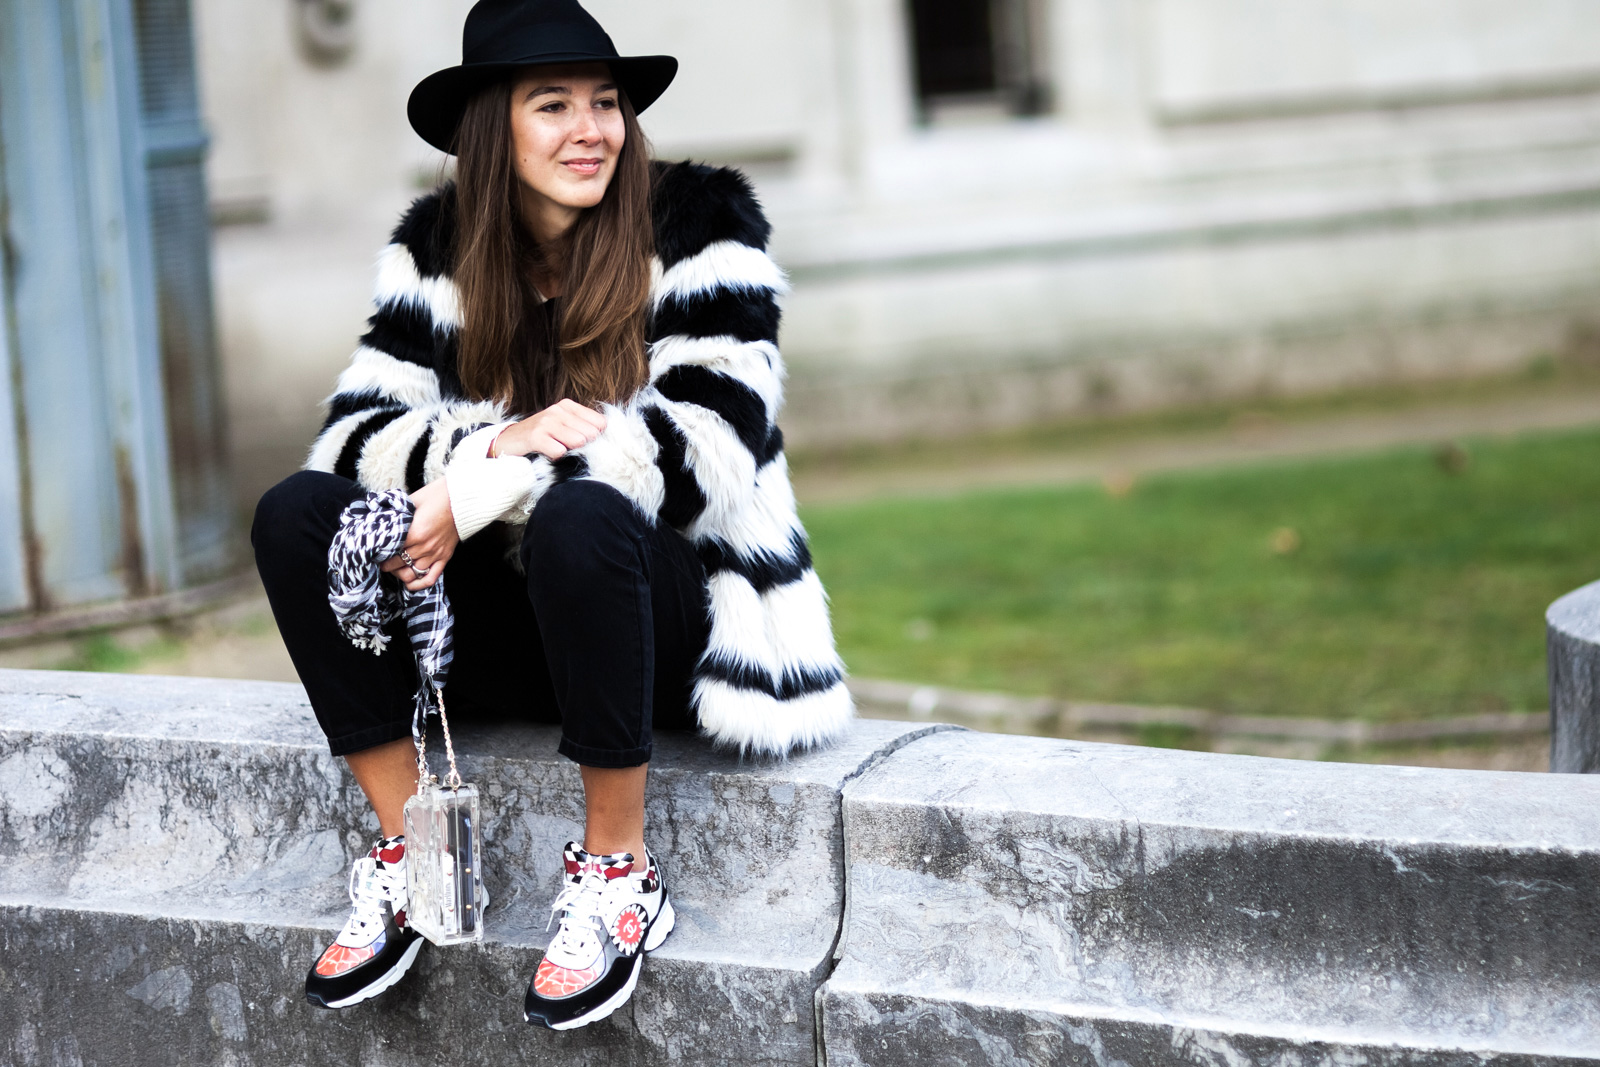 Estelle Pigault wearing Chanel sneakers and bag, Bershka fur coat, Pull and Bear sweater and Levis jeans before the Chanel Spring 2015 Haute Couture fashion show in Paris, France